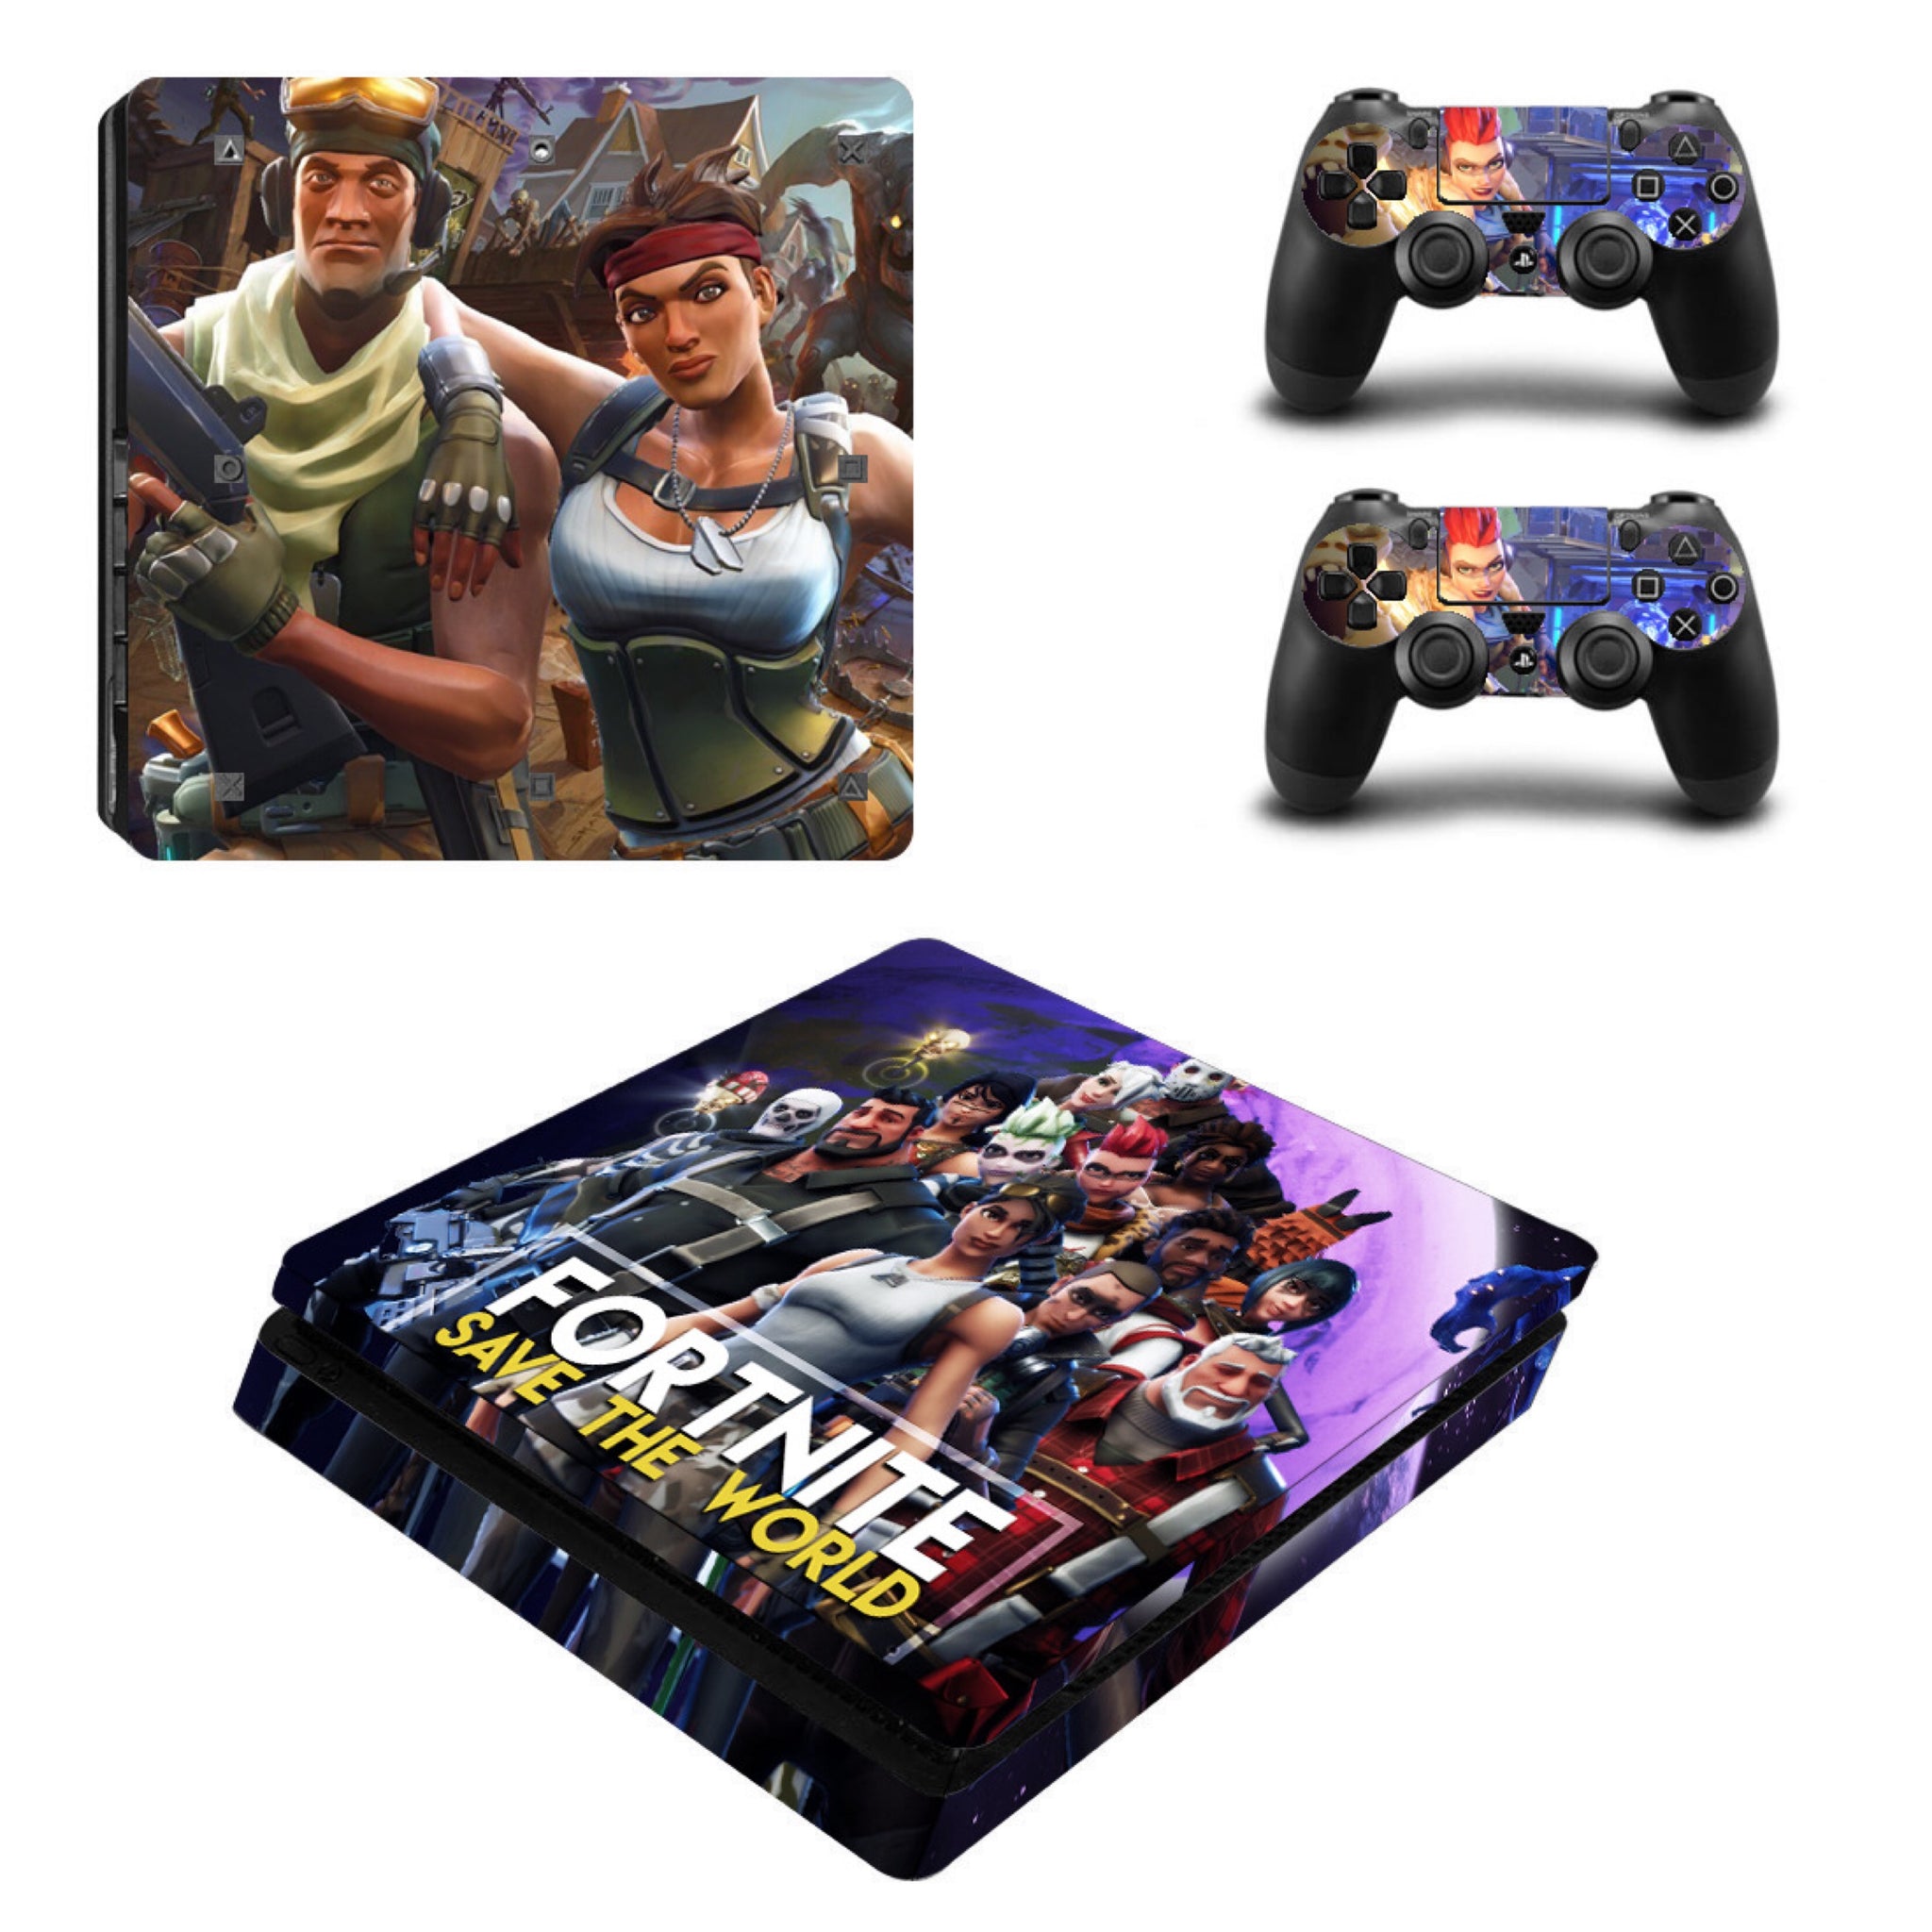 Game Fortnite Skin For Ps4 Slim Console 2pcs Controller Protective Amcoser